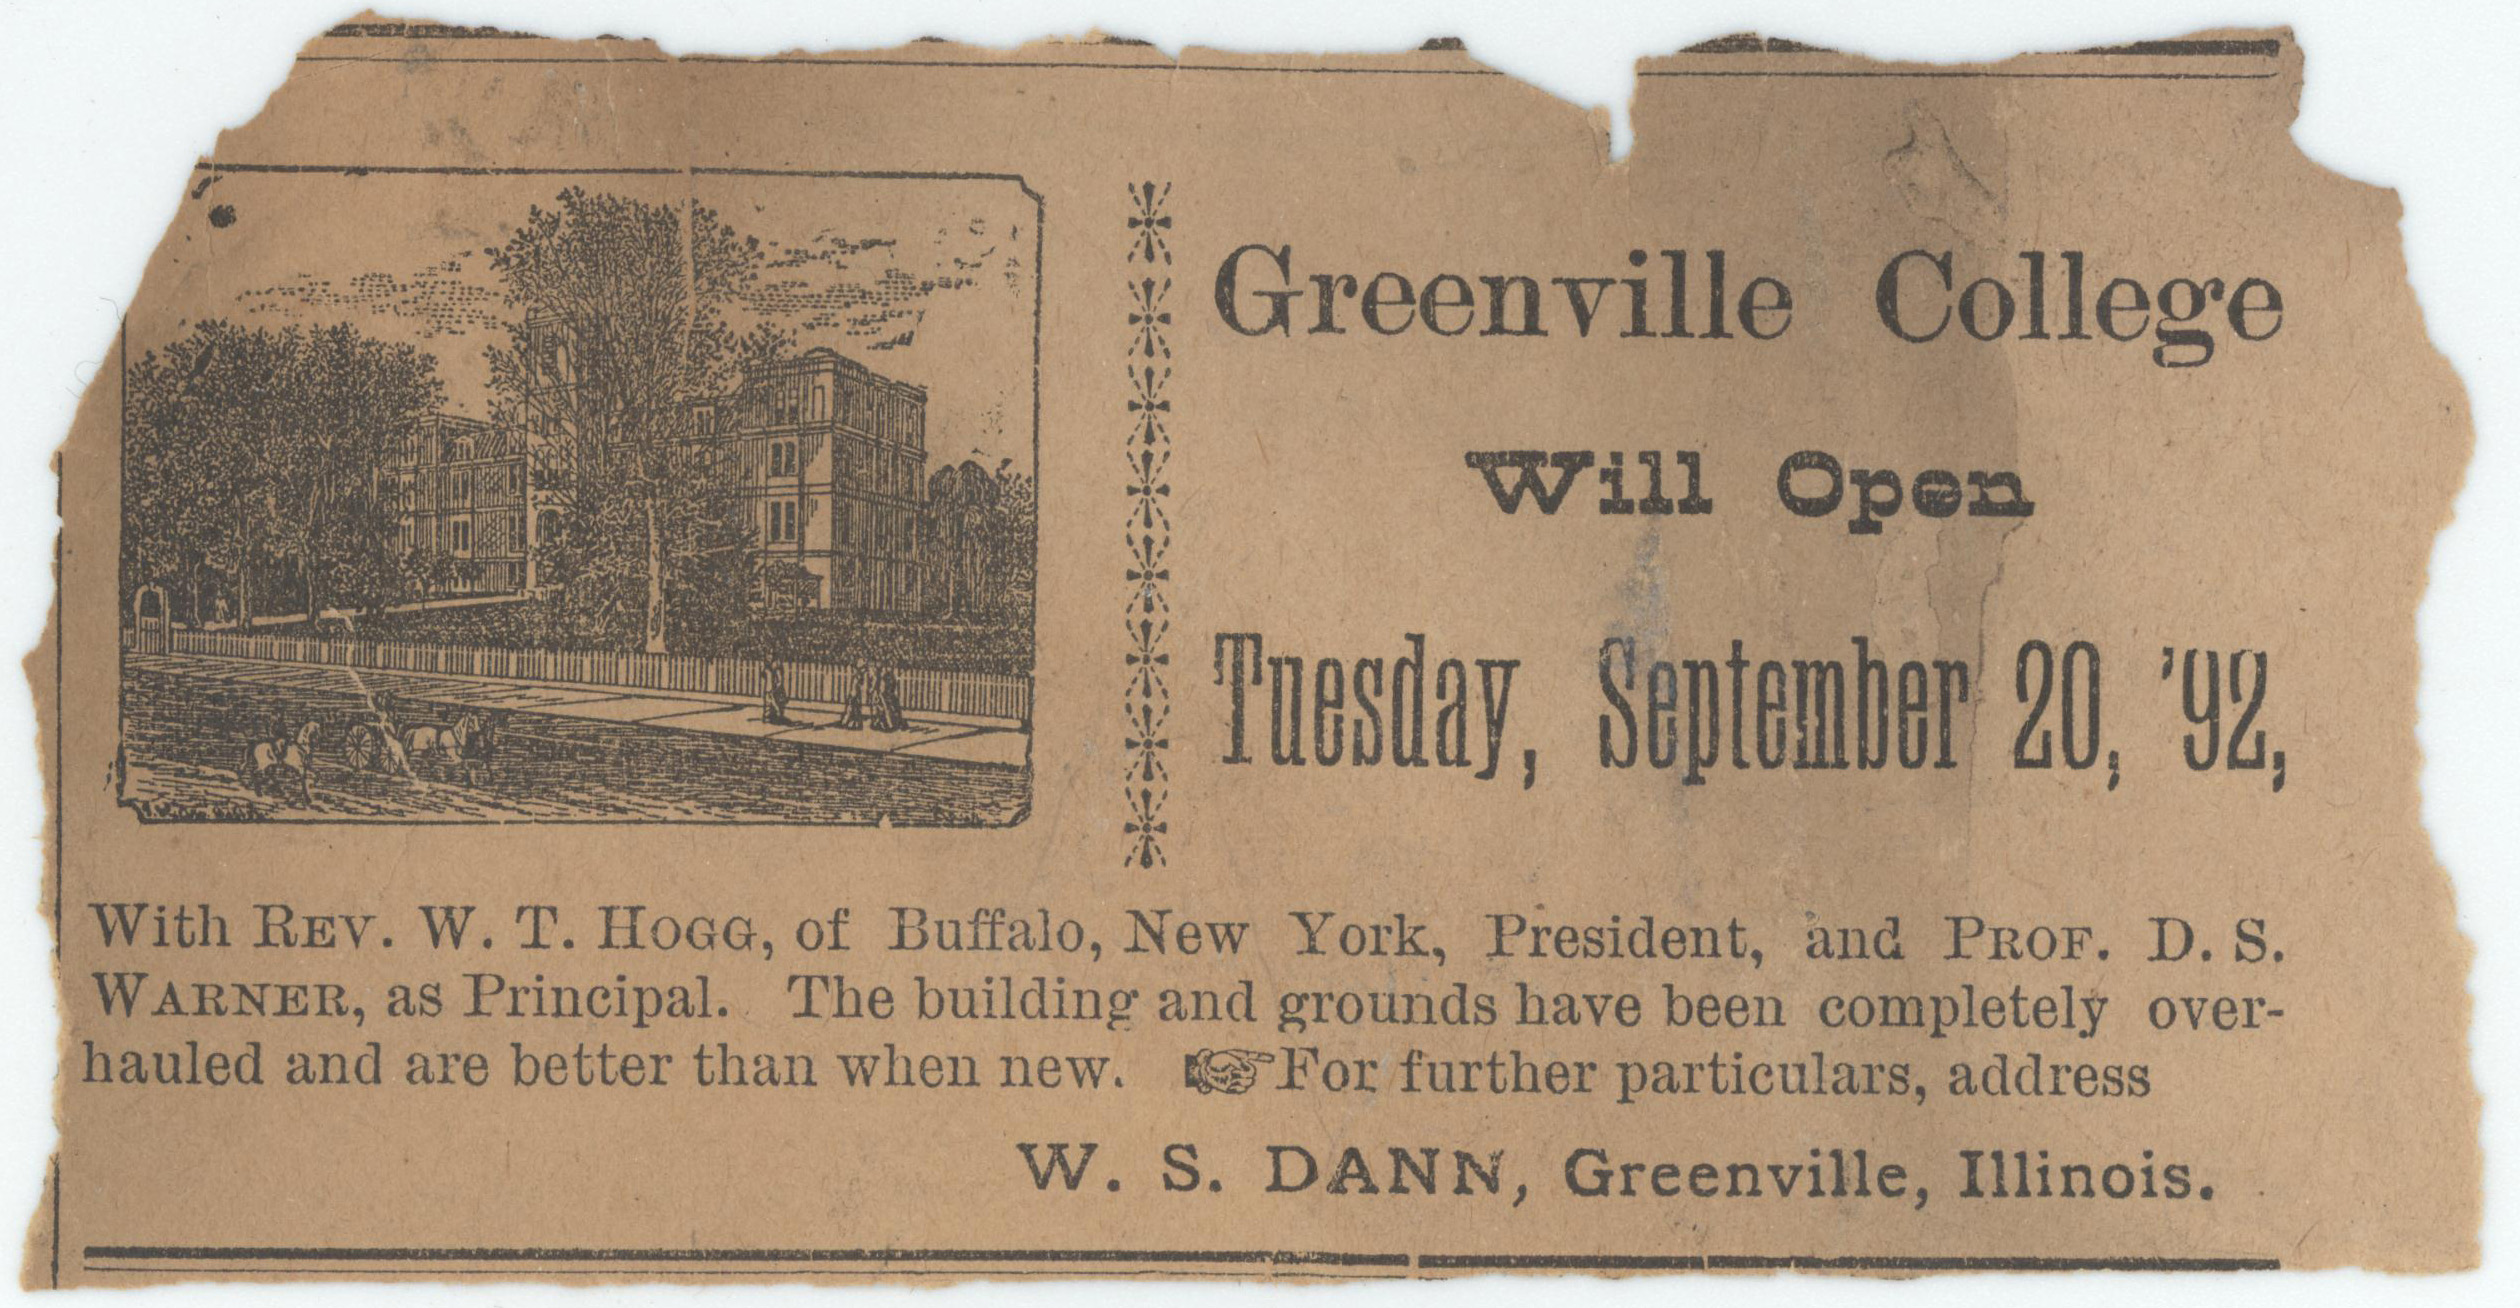 Greenville College Celebrates 120 Years of Christian Education